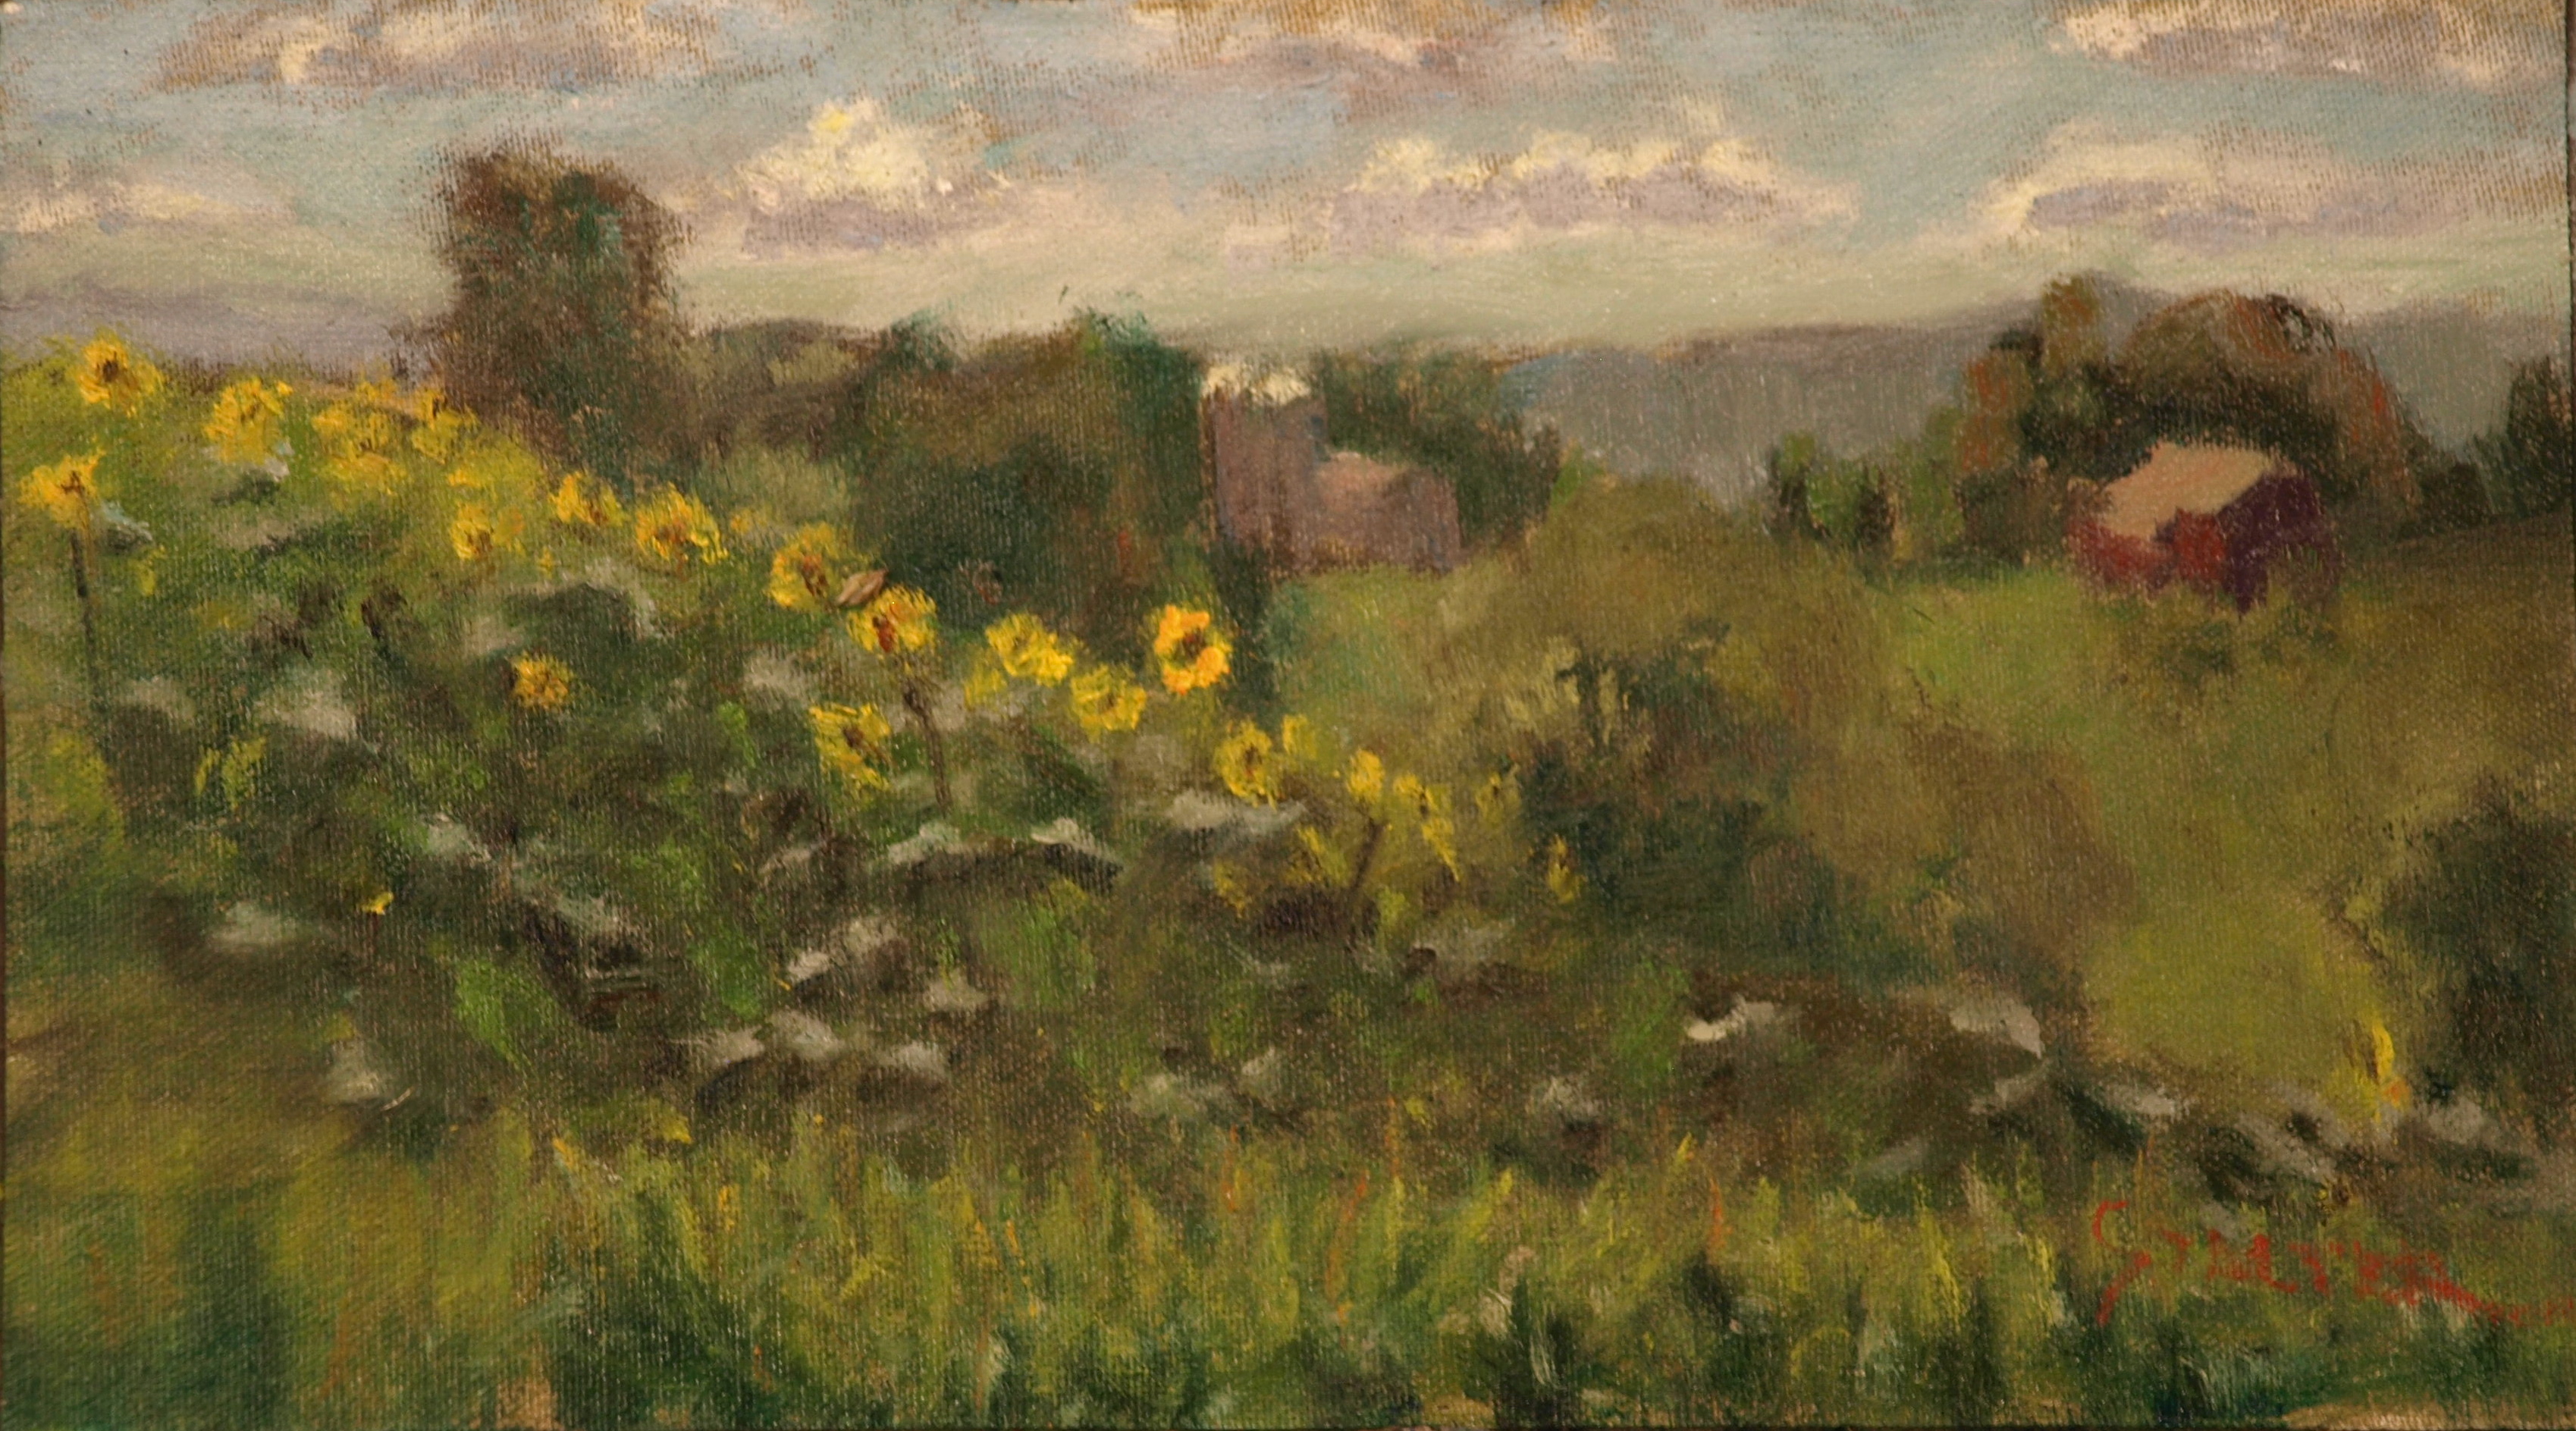 Sunflower Field, Oil on Canvas on Panel, 8 x 14 Inches, by Richard Stalter, $225